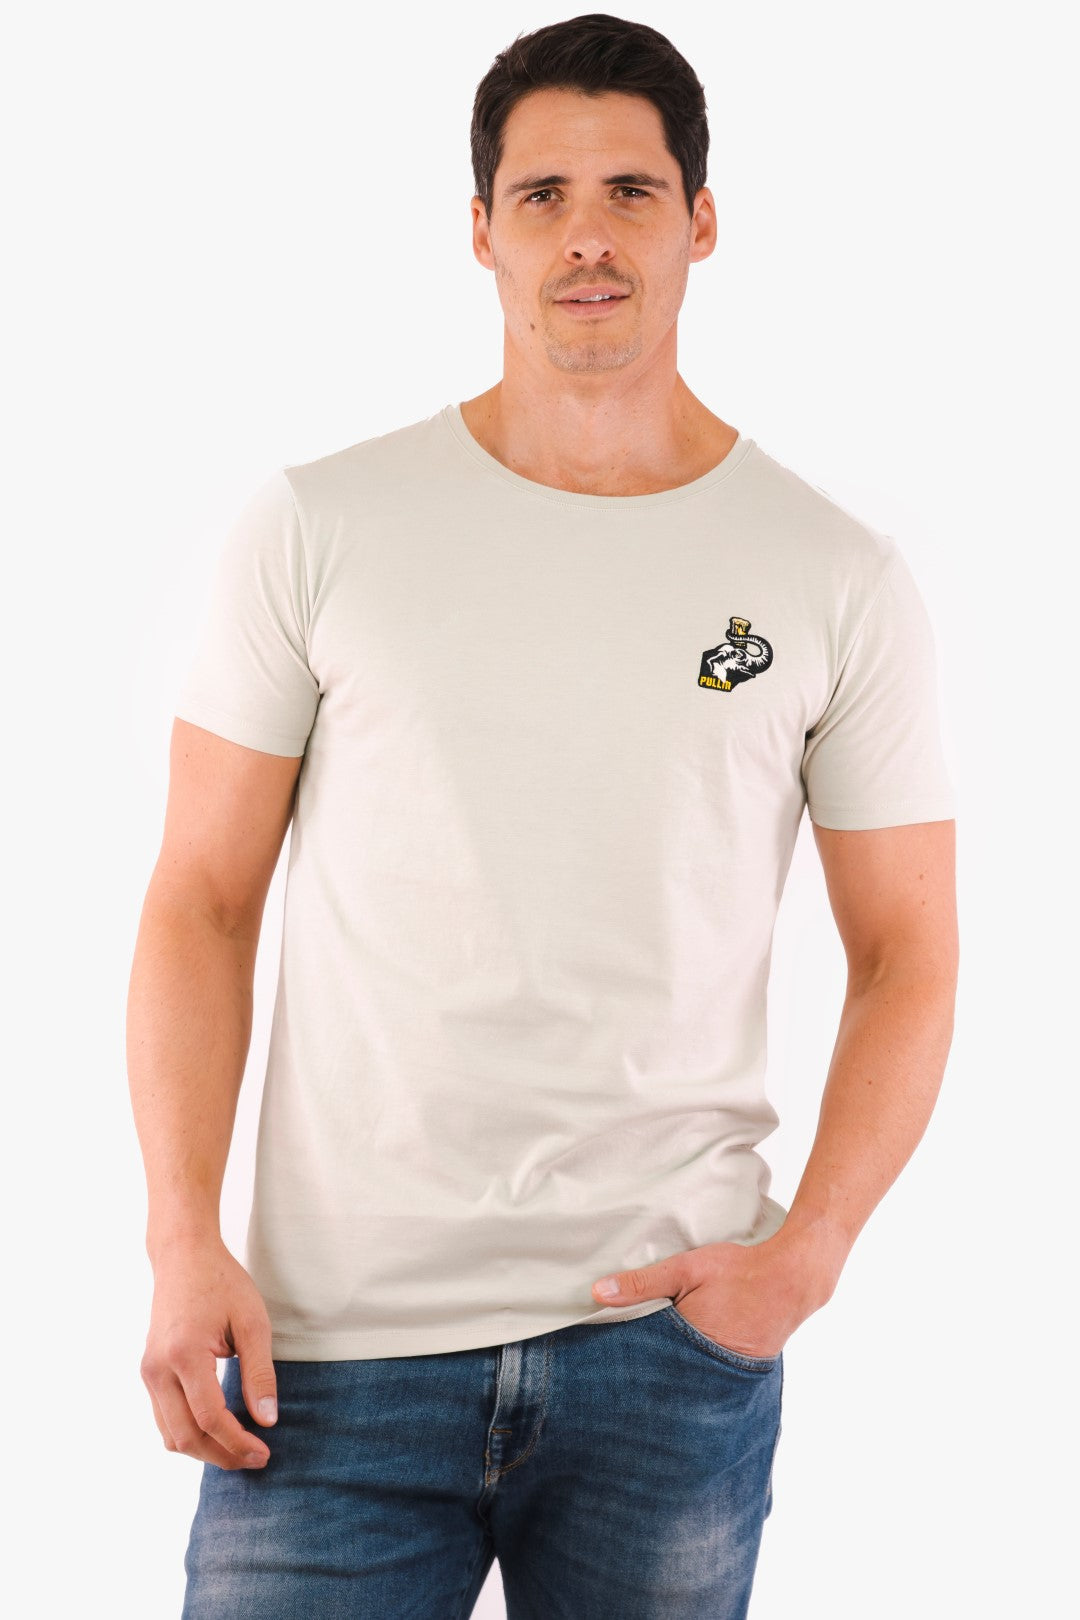 Pullin T-Shirt in Beige color